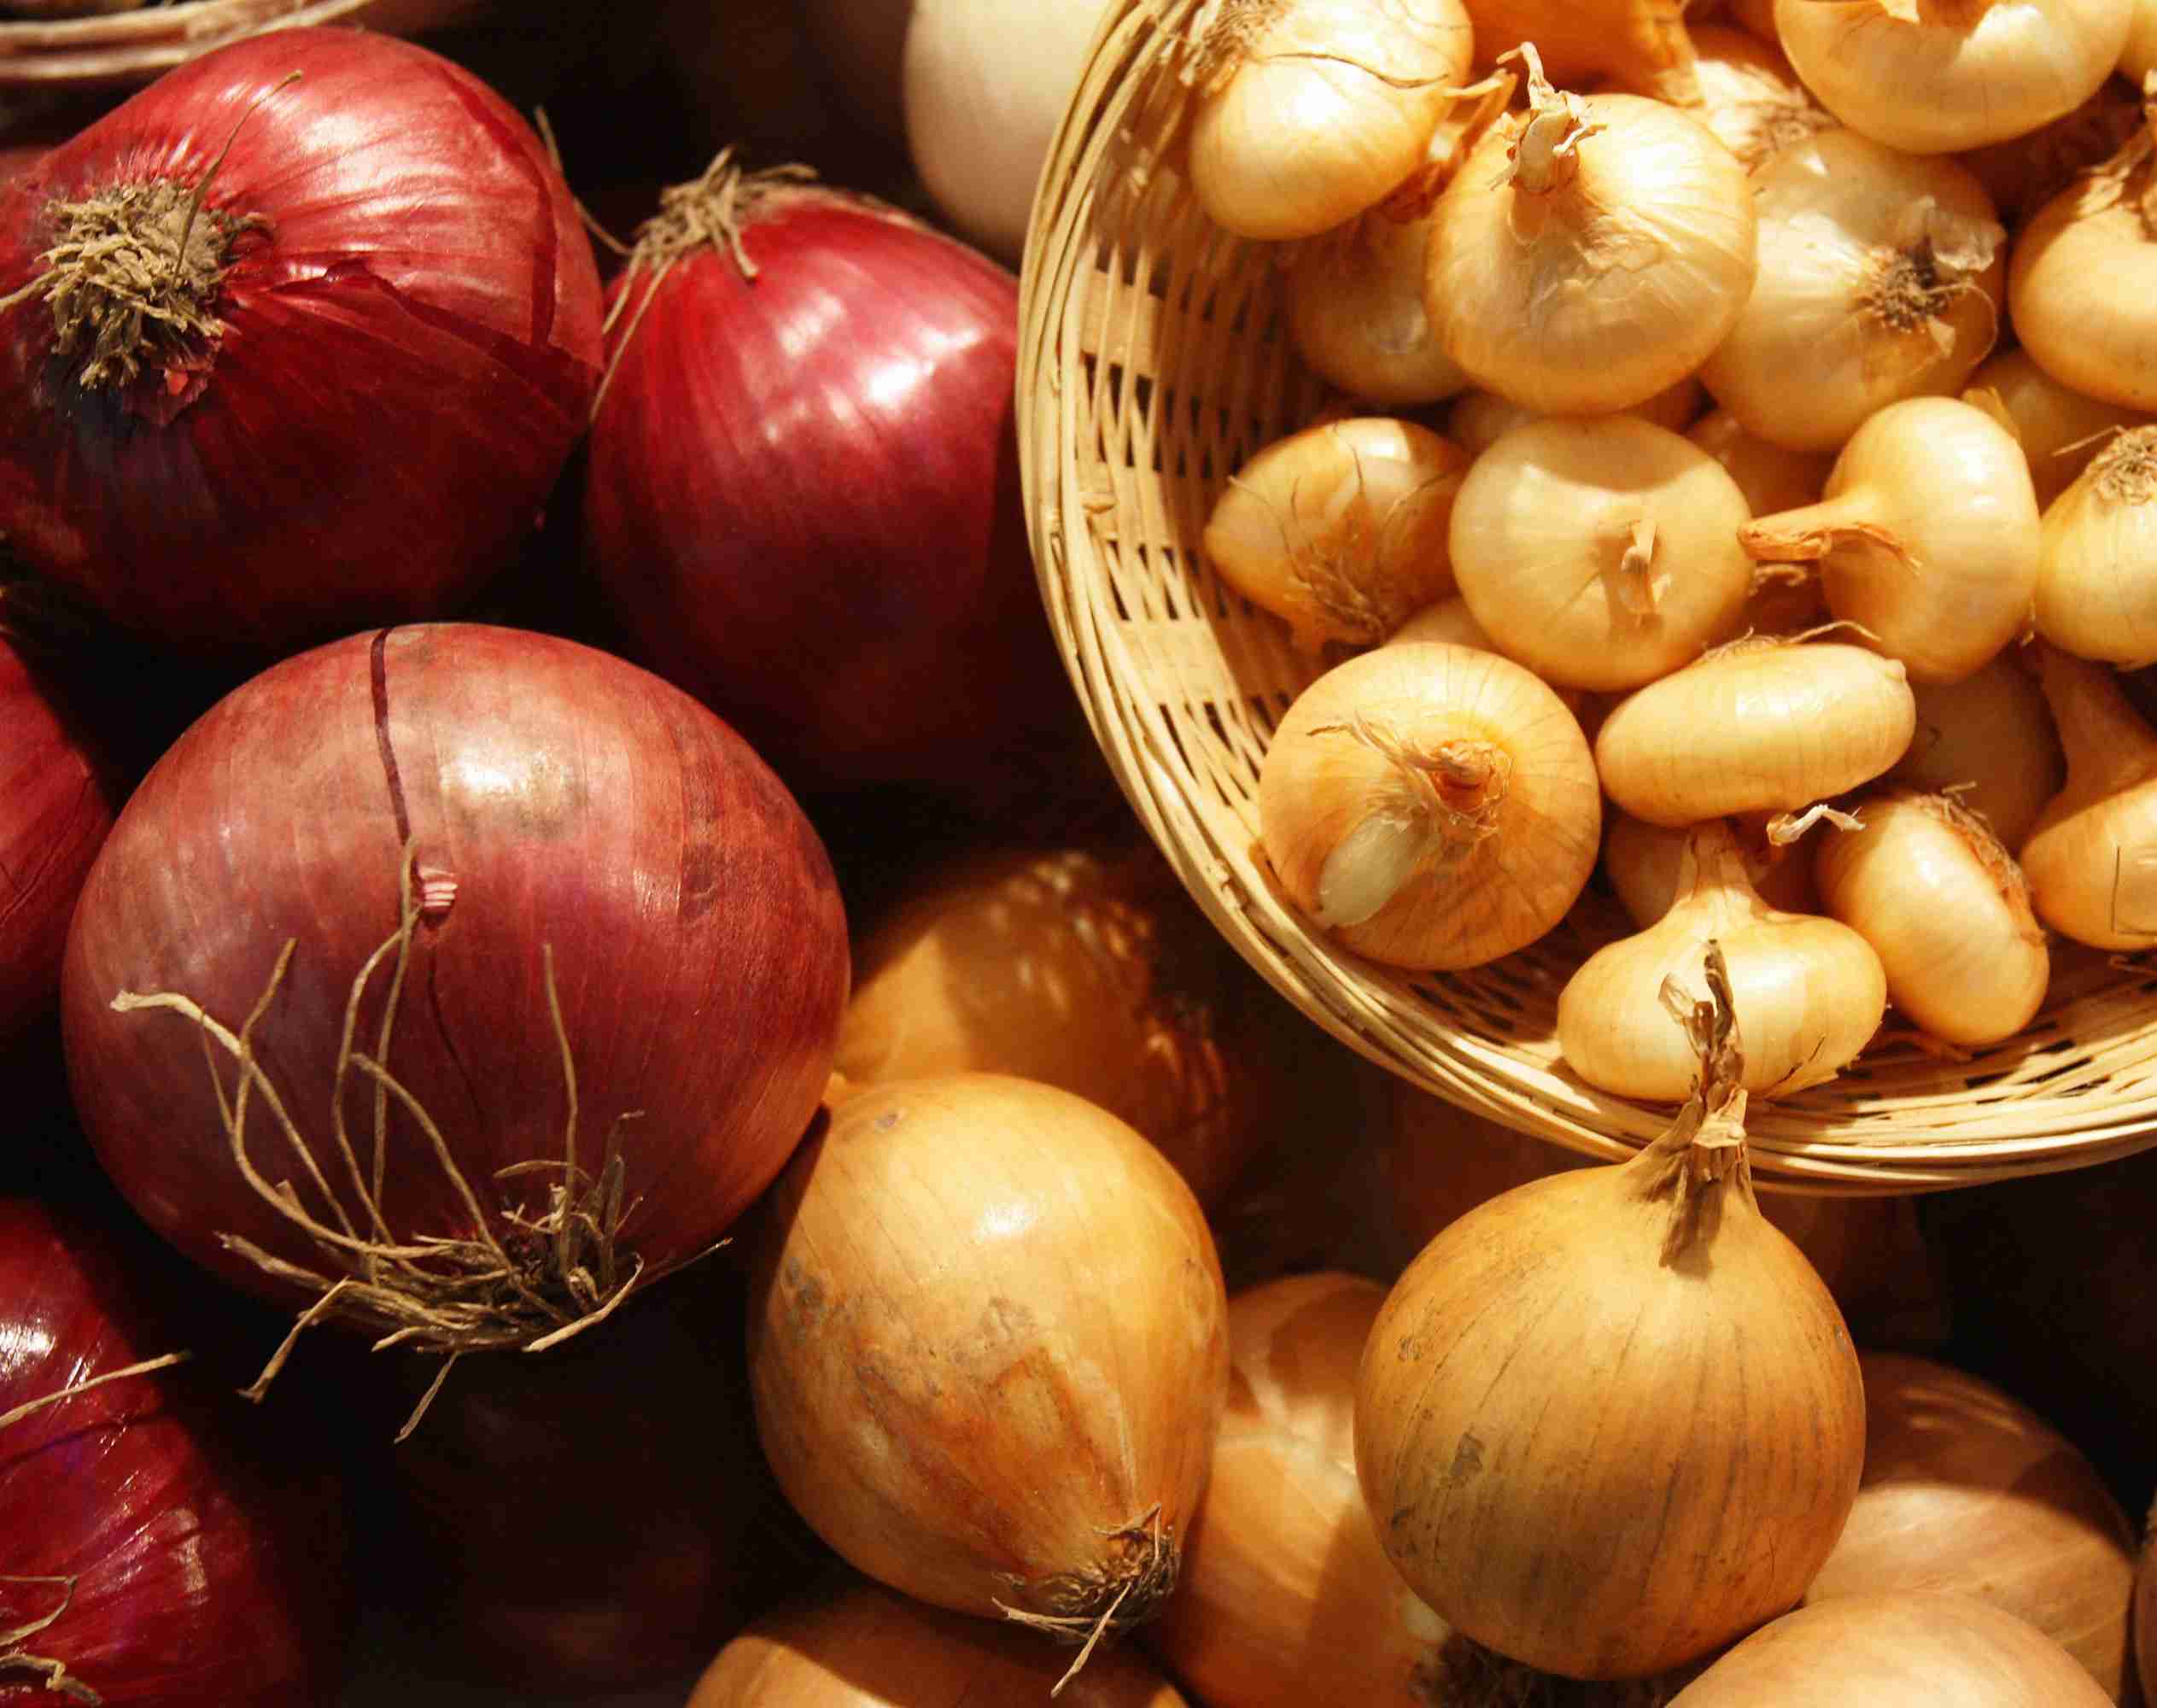 A variety of red and yellow onions, with the yellow ones in a basket.